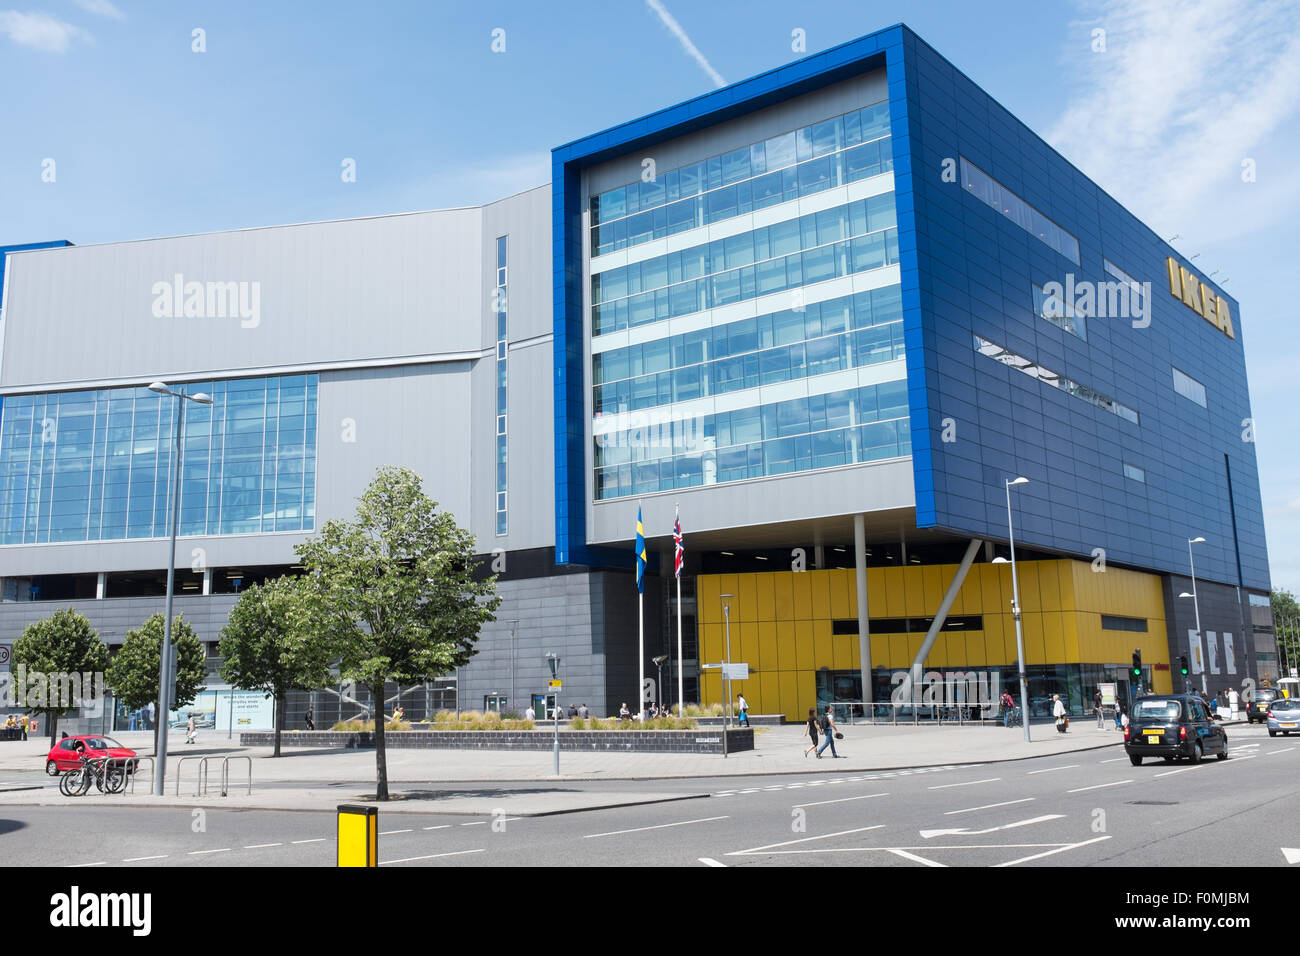 Tall Ikea building in the centre of Coventry Stock Photo